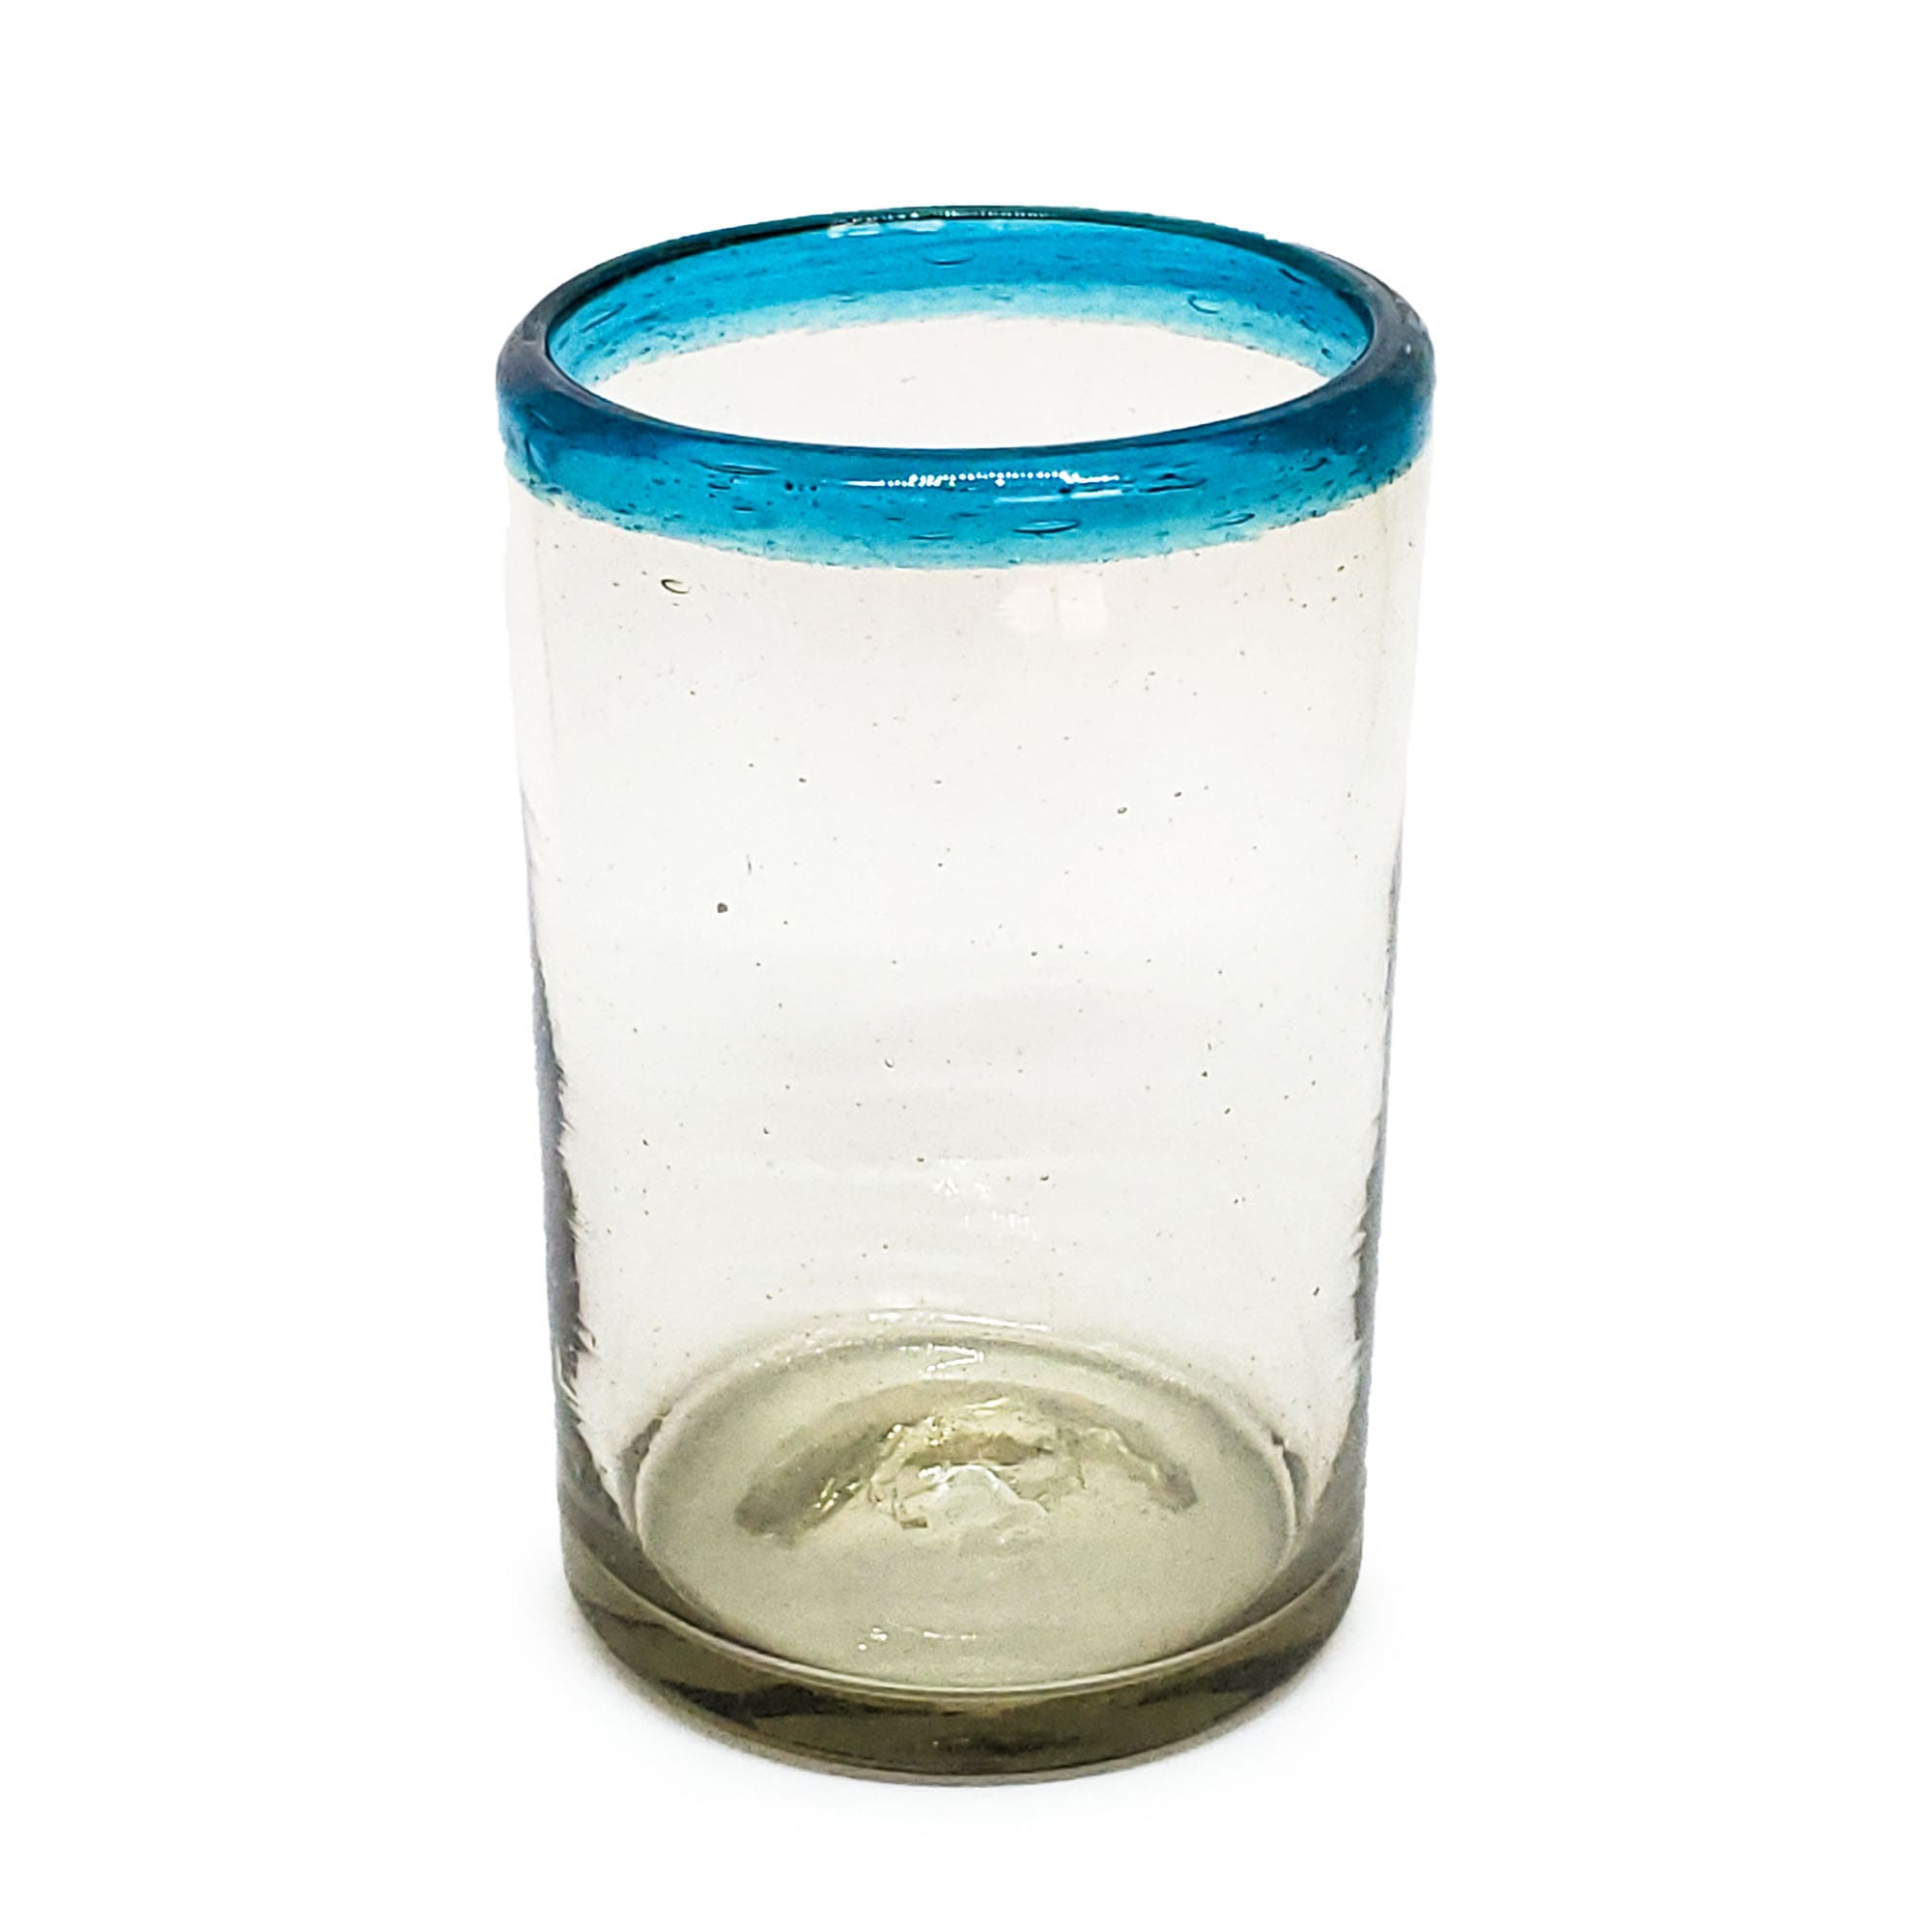 New Items / Aqua Blue Rim 14 oz Drinking Glasses  / These glasses are sure to embelish any table setting, with their aqua blue decor.<br>1-Year Product Replacement in case of defects (glasses broken in dishwasher is considered a defect).